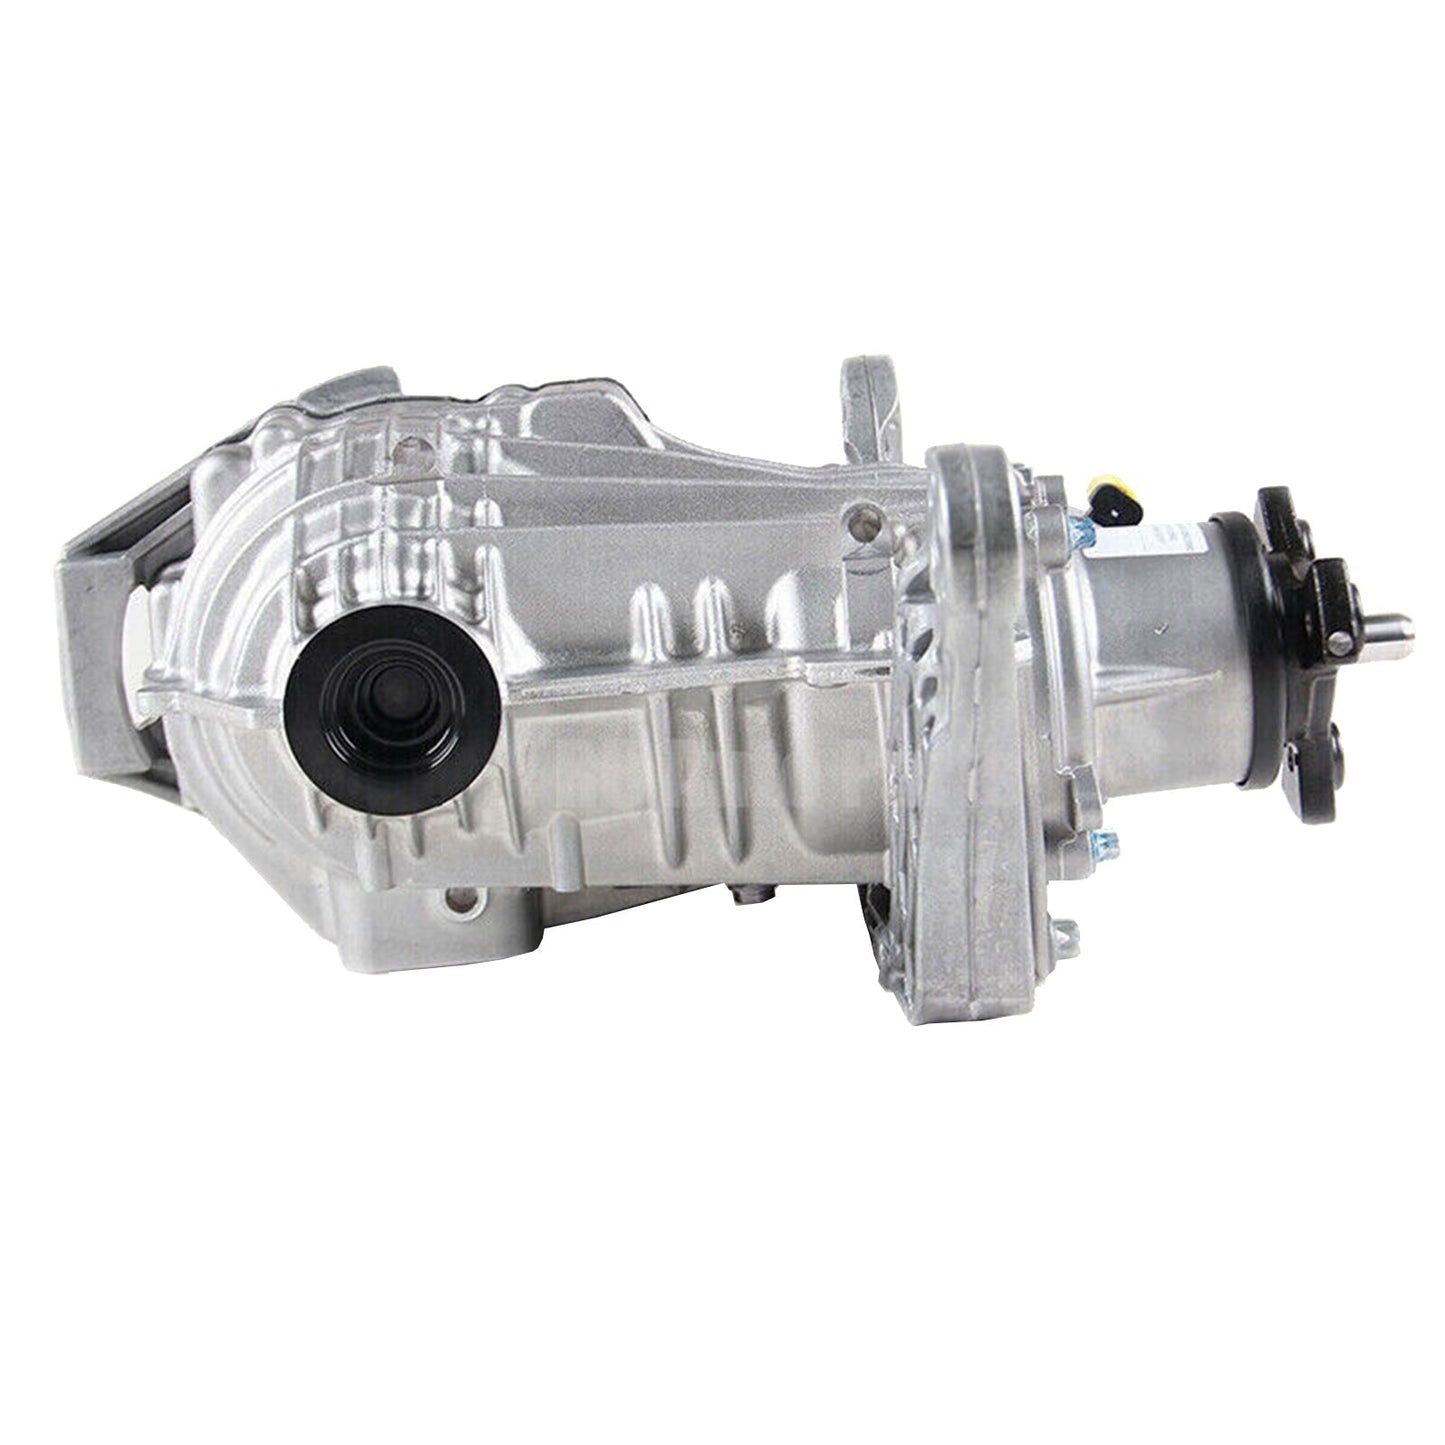 Mercedes Benz W117 CLA 250 4-MATIC Rear Differential Assembly A2463500802